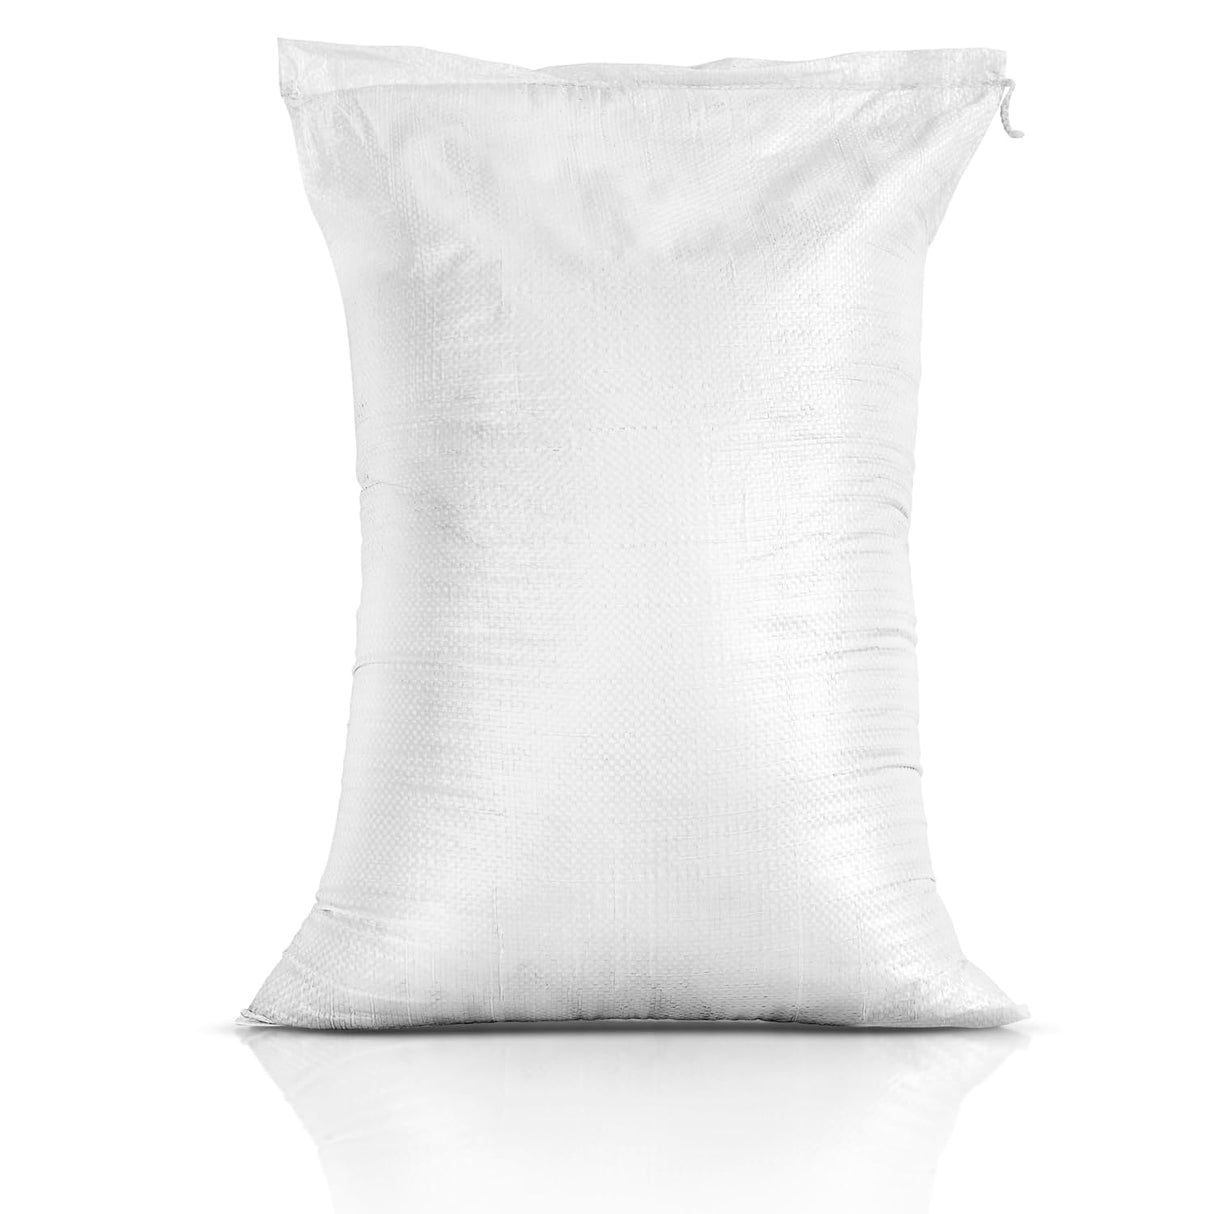 Singhal Empty Bag, Bora, Bori for Packing of Food, Vegatable, Grains, Wheat, Rice, Sugar etc Products (27x45 inches) - Pack of 8